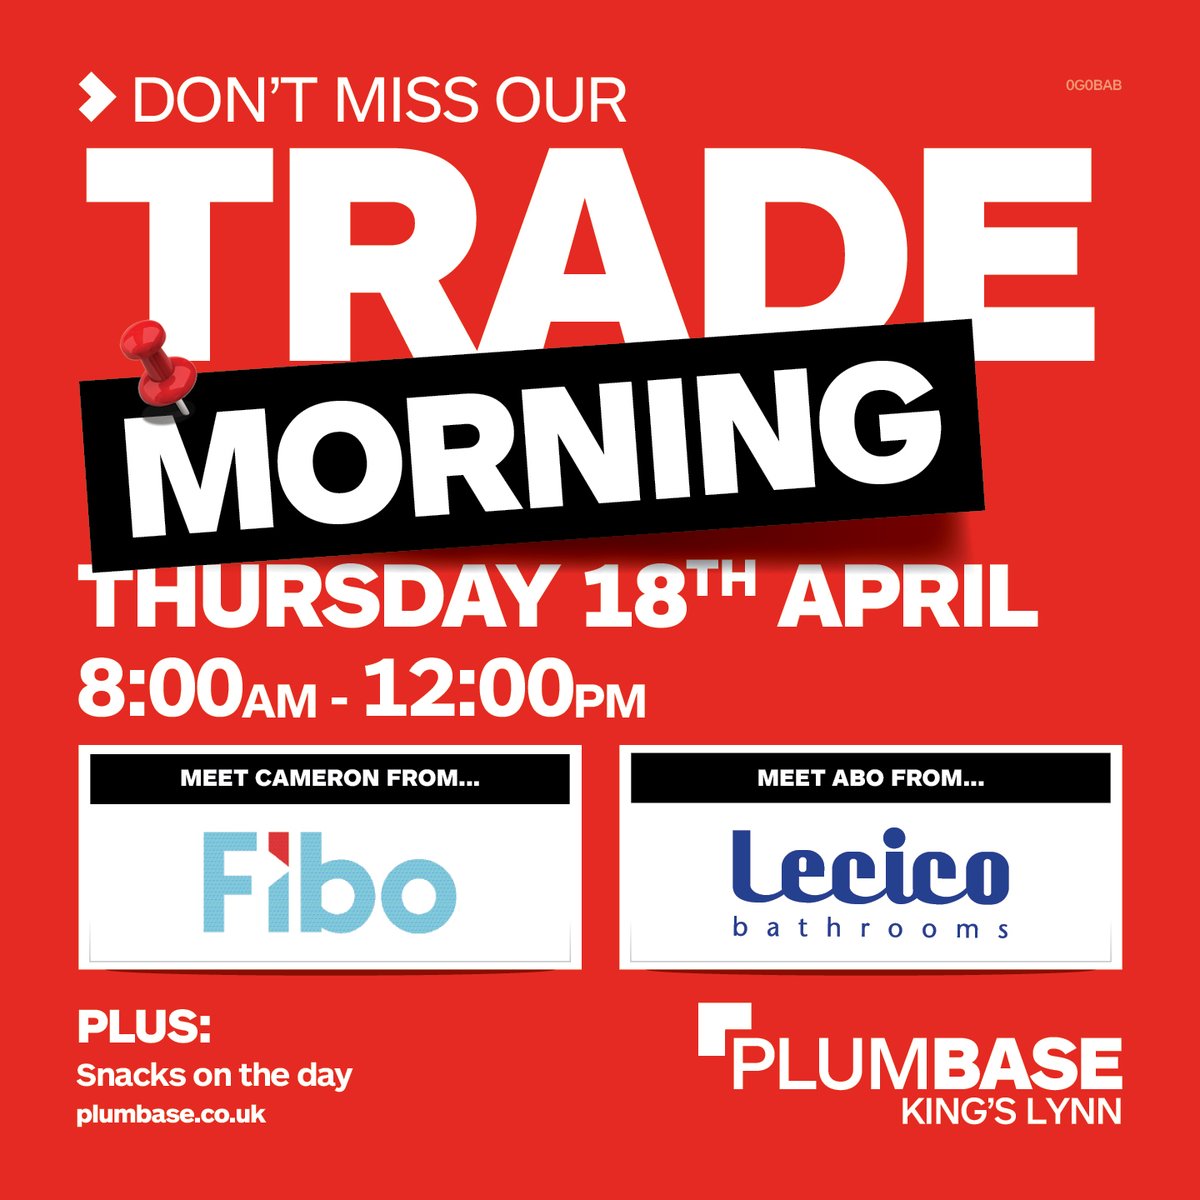 🔴TRADE MORNING Thursday 18th APRIL FROM 8AM 🔴 Plumbase KINGS LYNN Your Chance to meet Cameron from Fibo UK and Abo from Lecico Bathrooms and find out all about their latest offers and products. 👊 #plumbers #plumbersmerchants #kingslynn